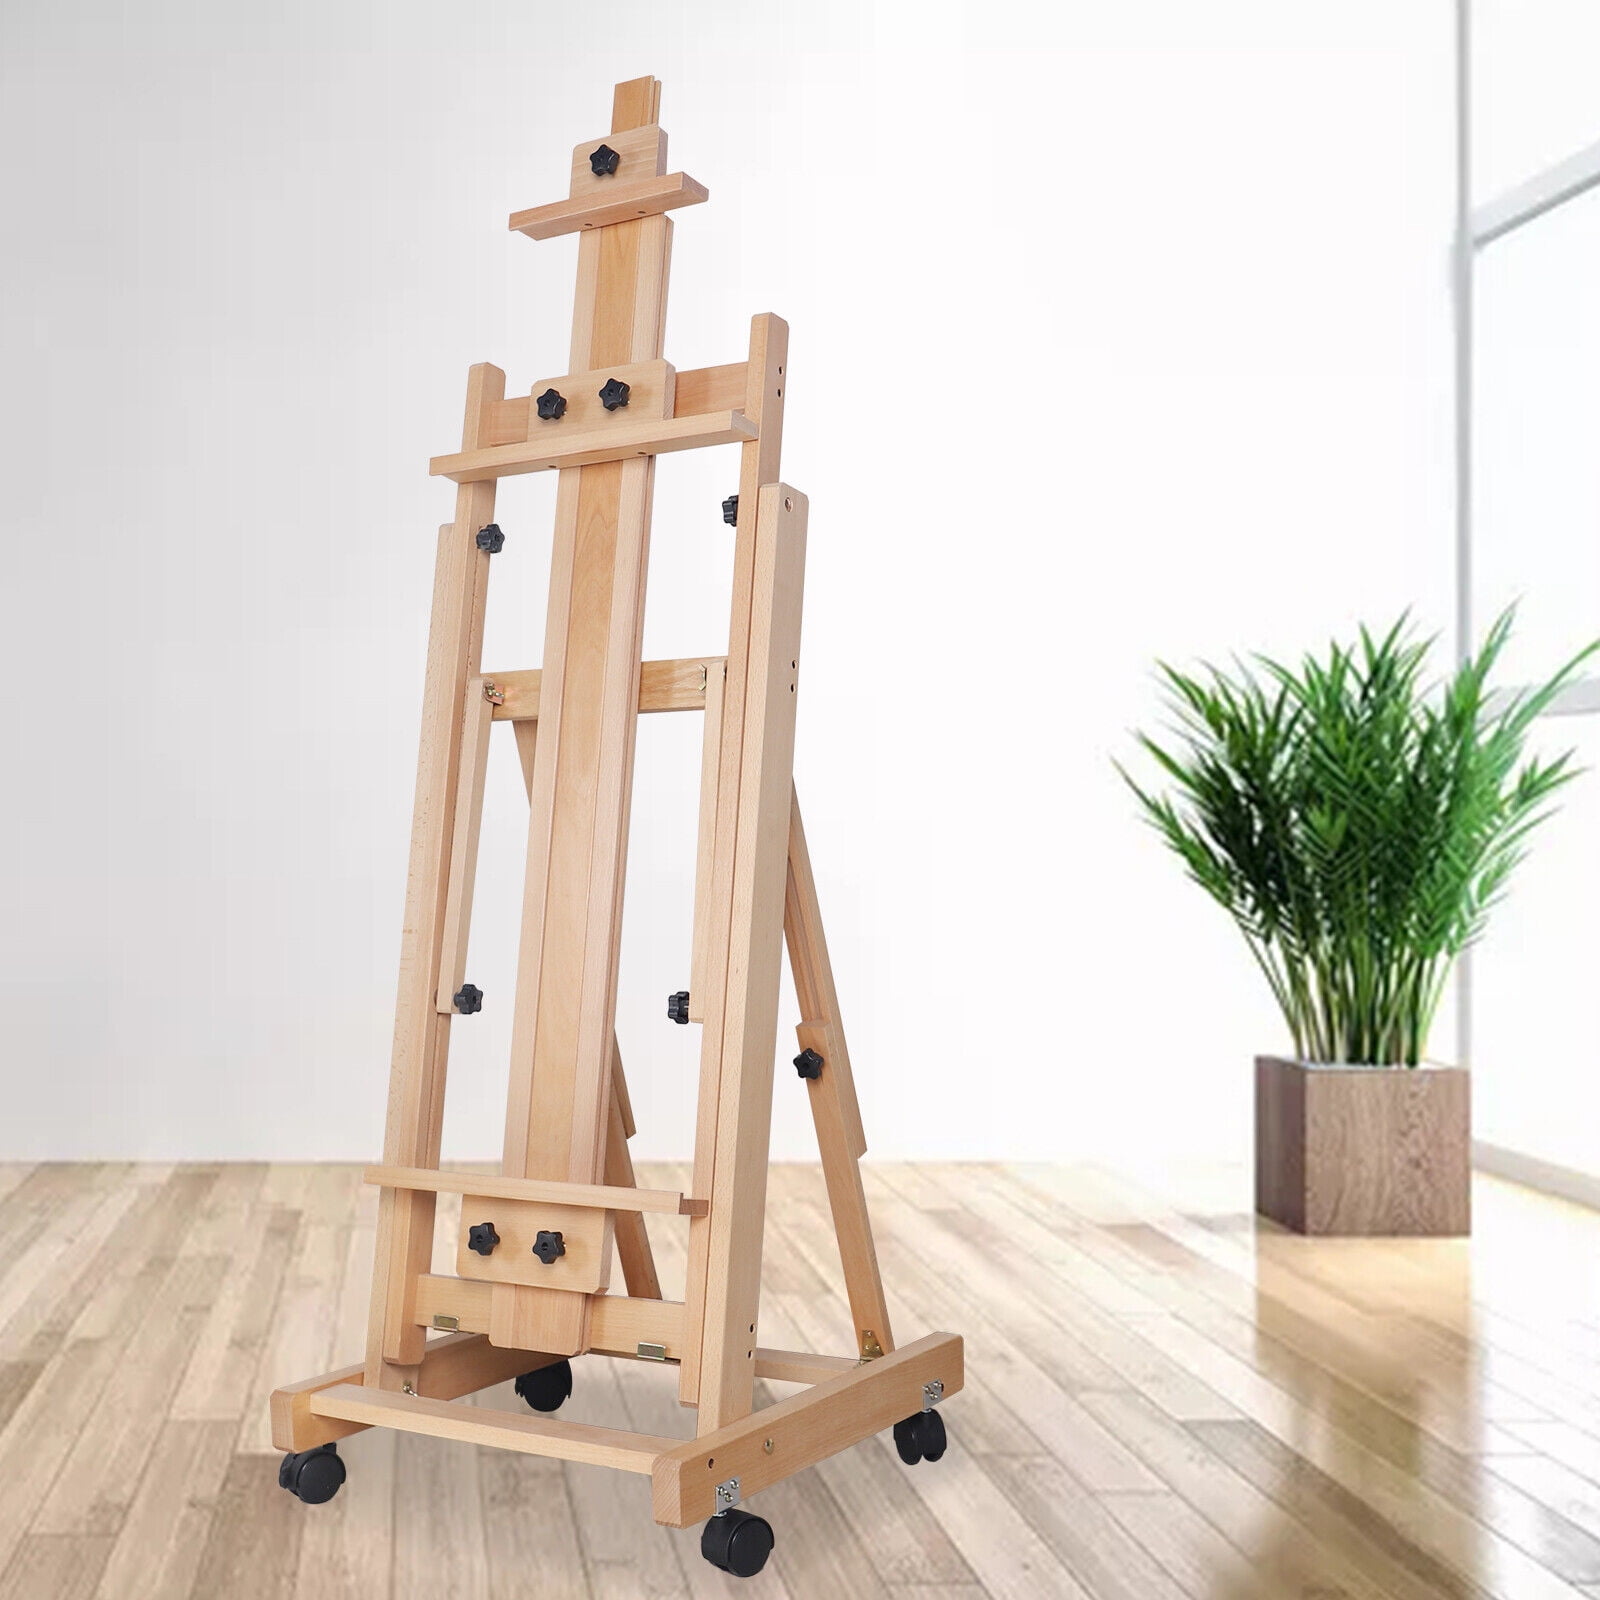 Sold at Auction: Best Heavy Duty Professional Wood Art Easel